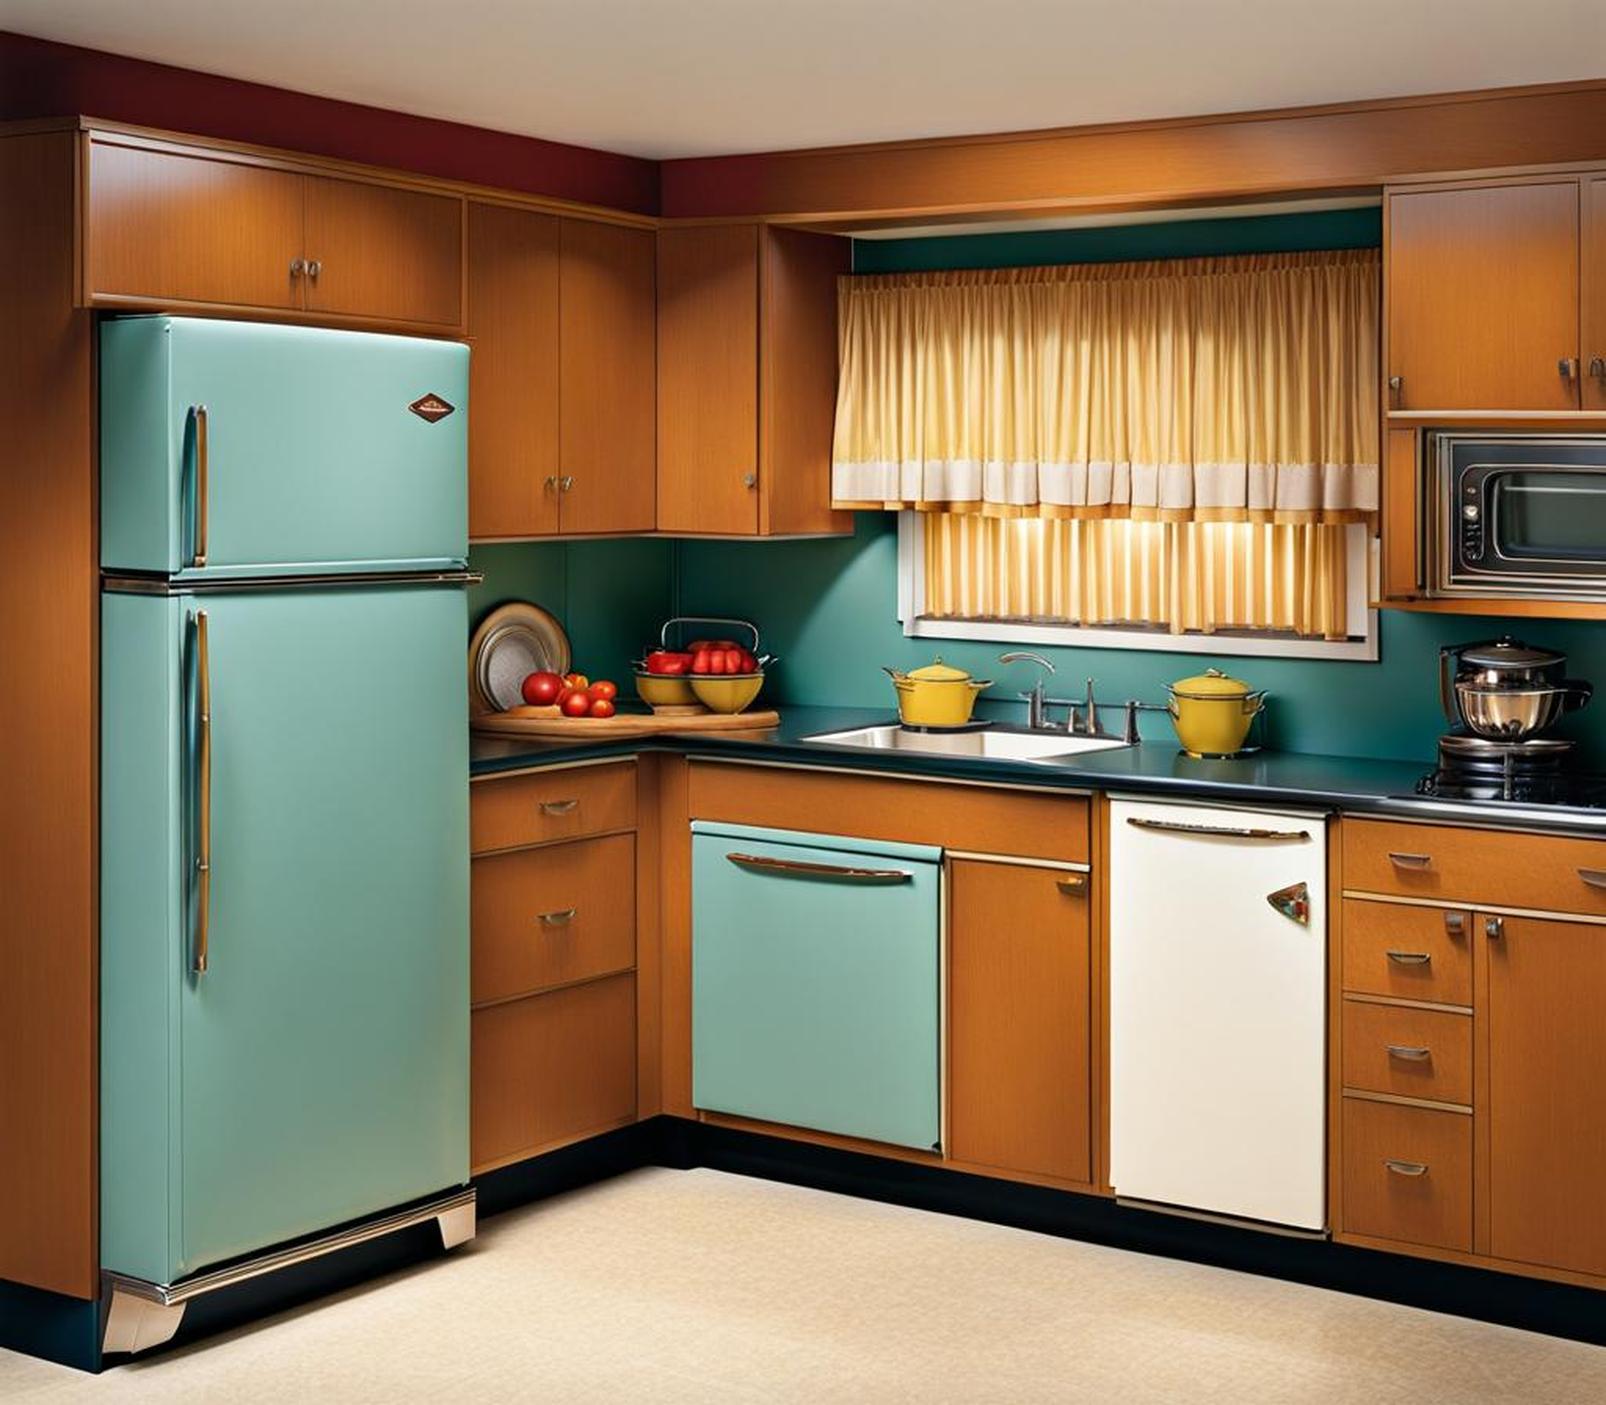 kitchens from the 1950s